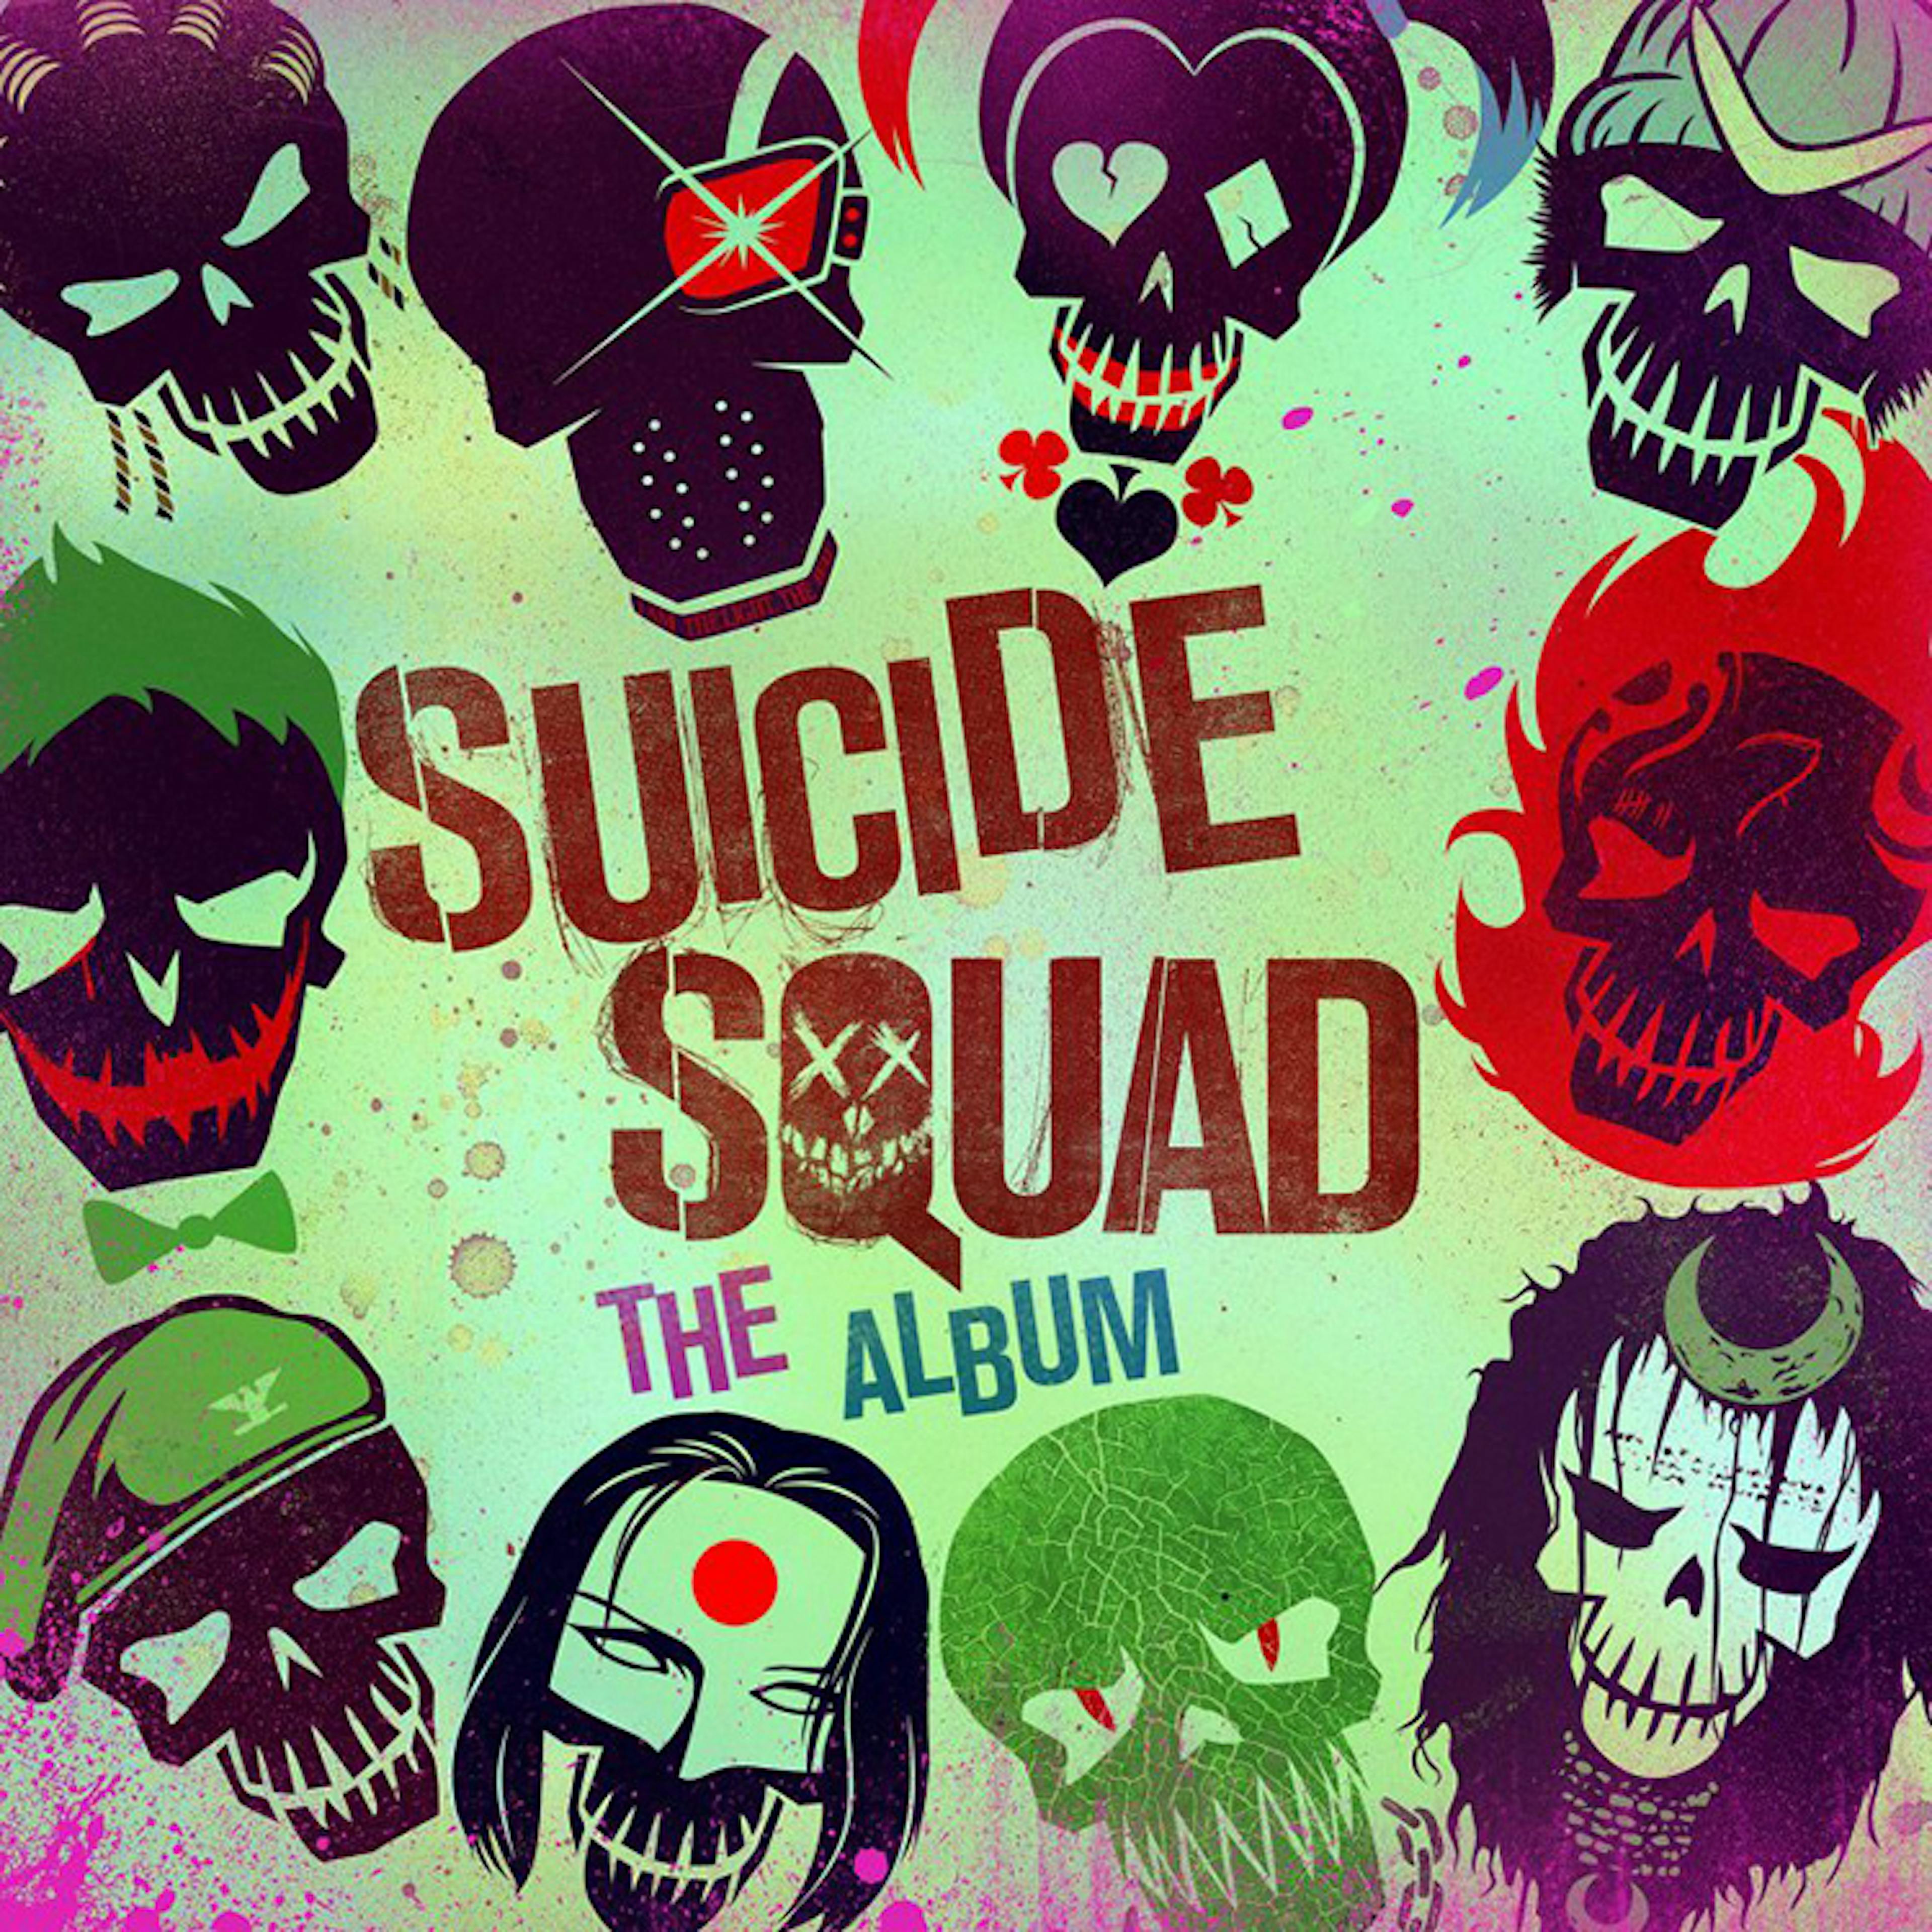 Suicide Squad: The Album, Featuring twenty one pilots And More!